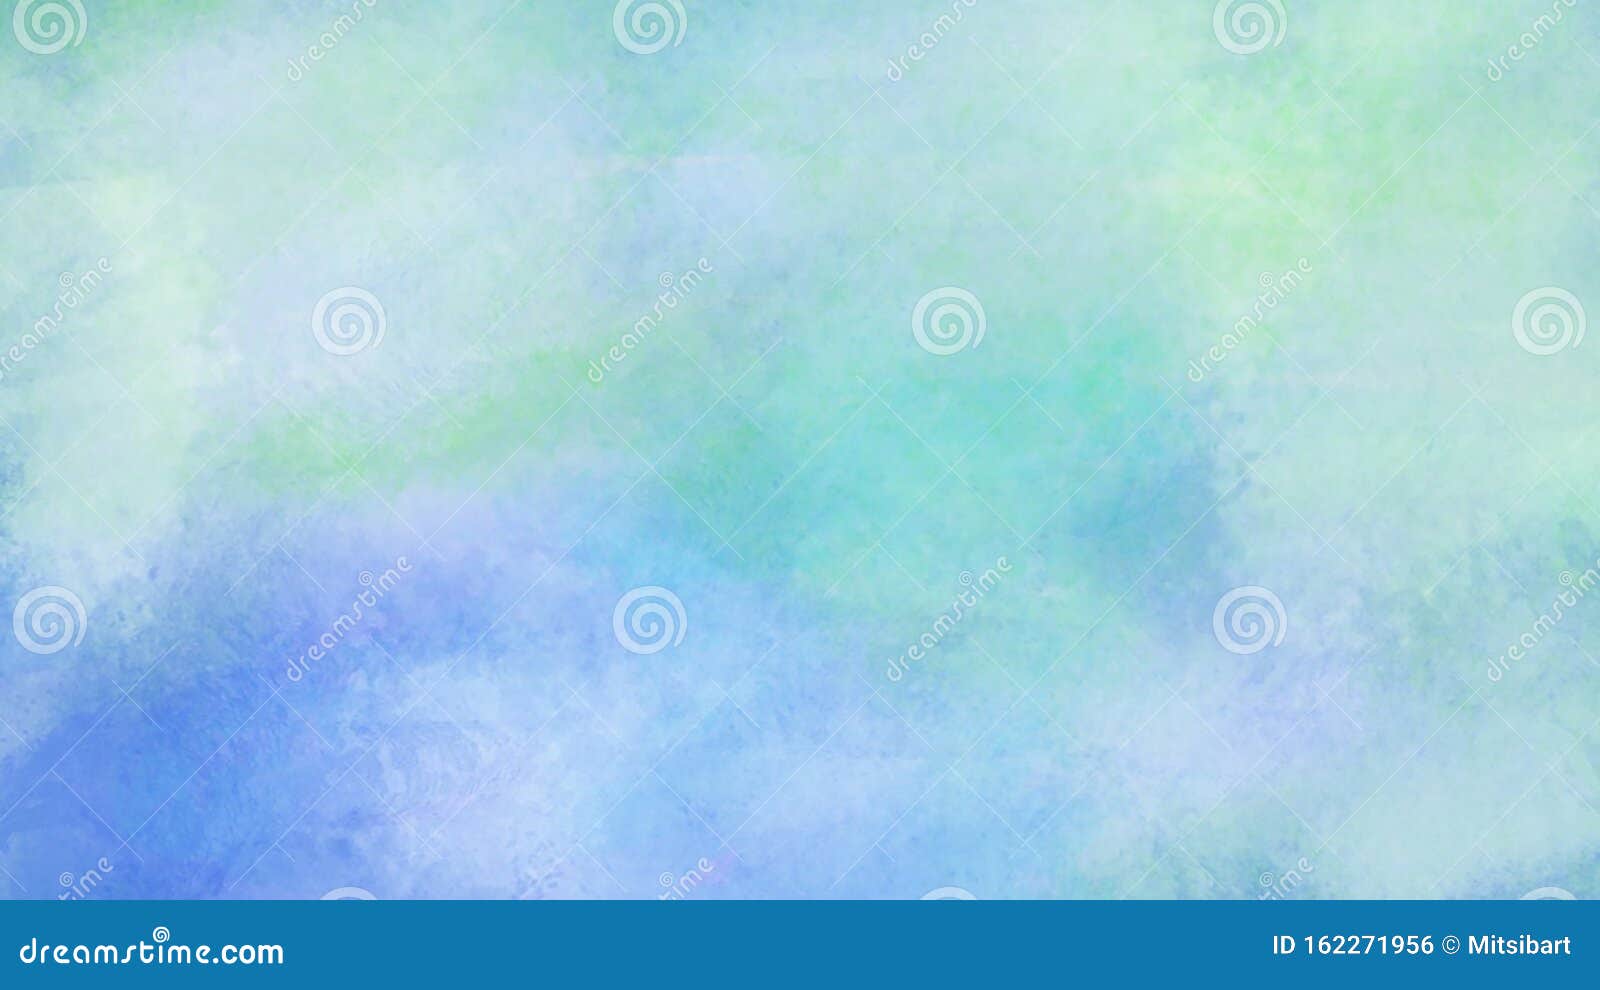 Watercolour Bright Blue Sky or Water Background Texture Stock ...